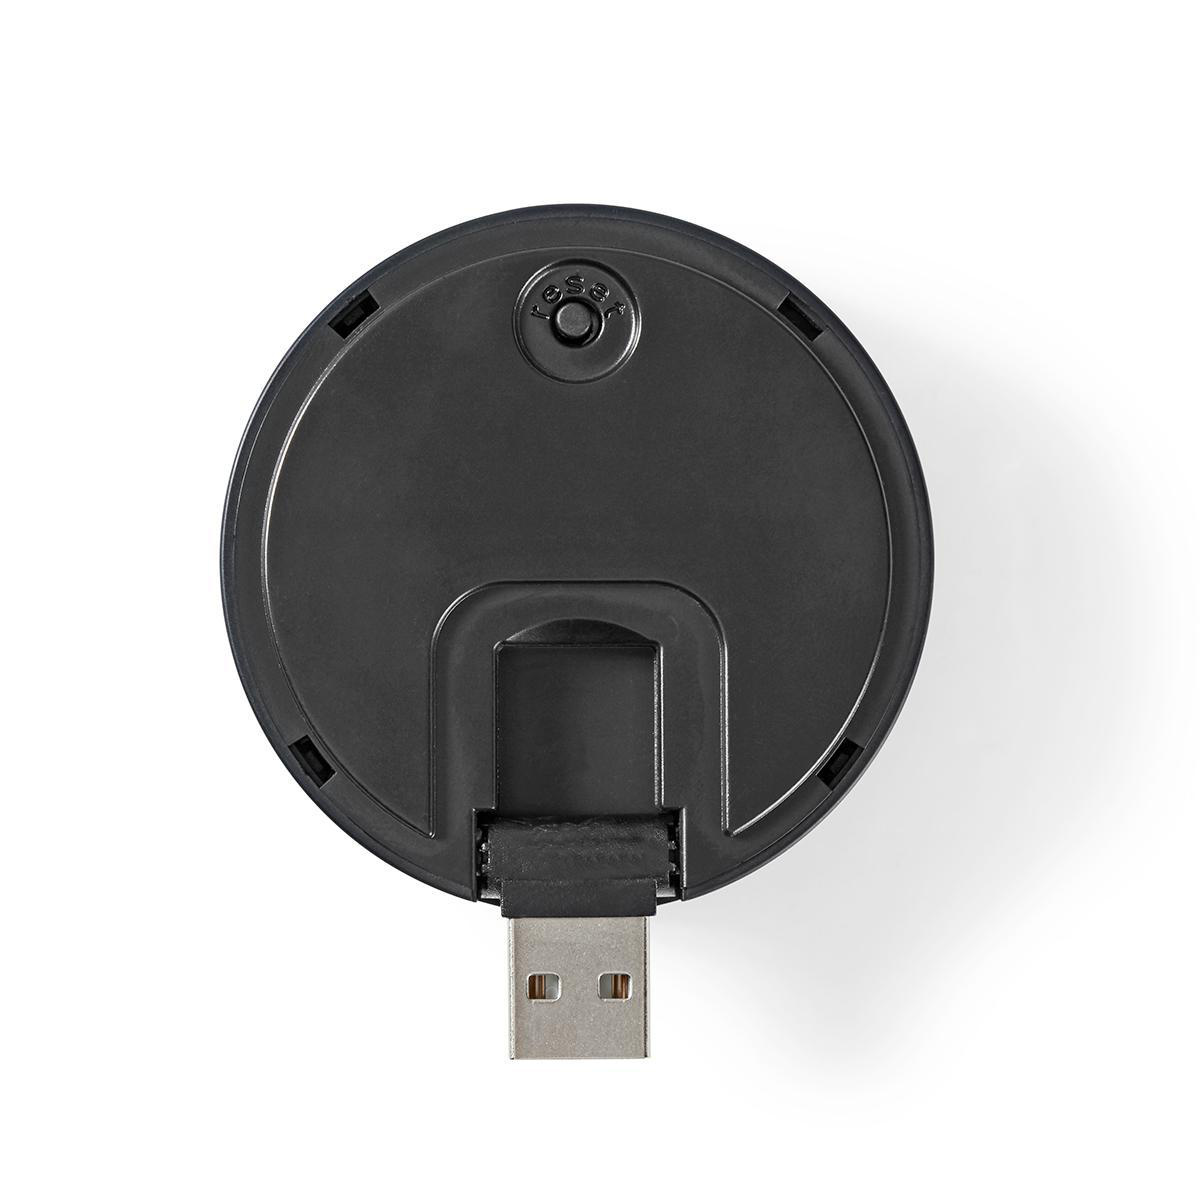 Draadloze Gong | Accessoire WIFICDP10GY | USB